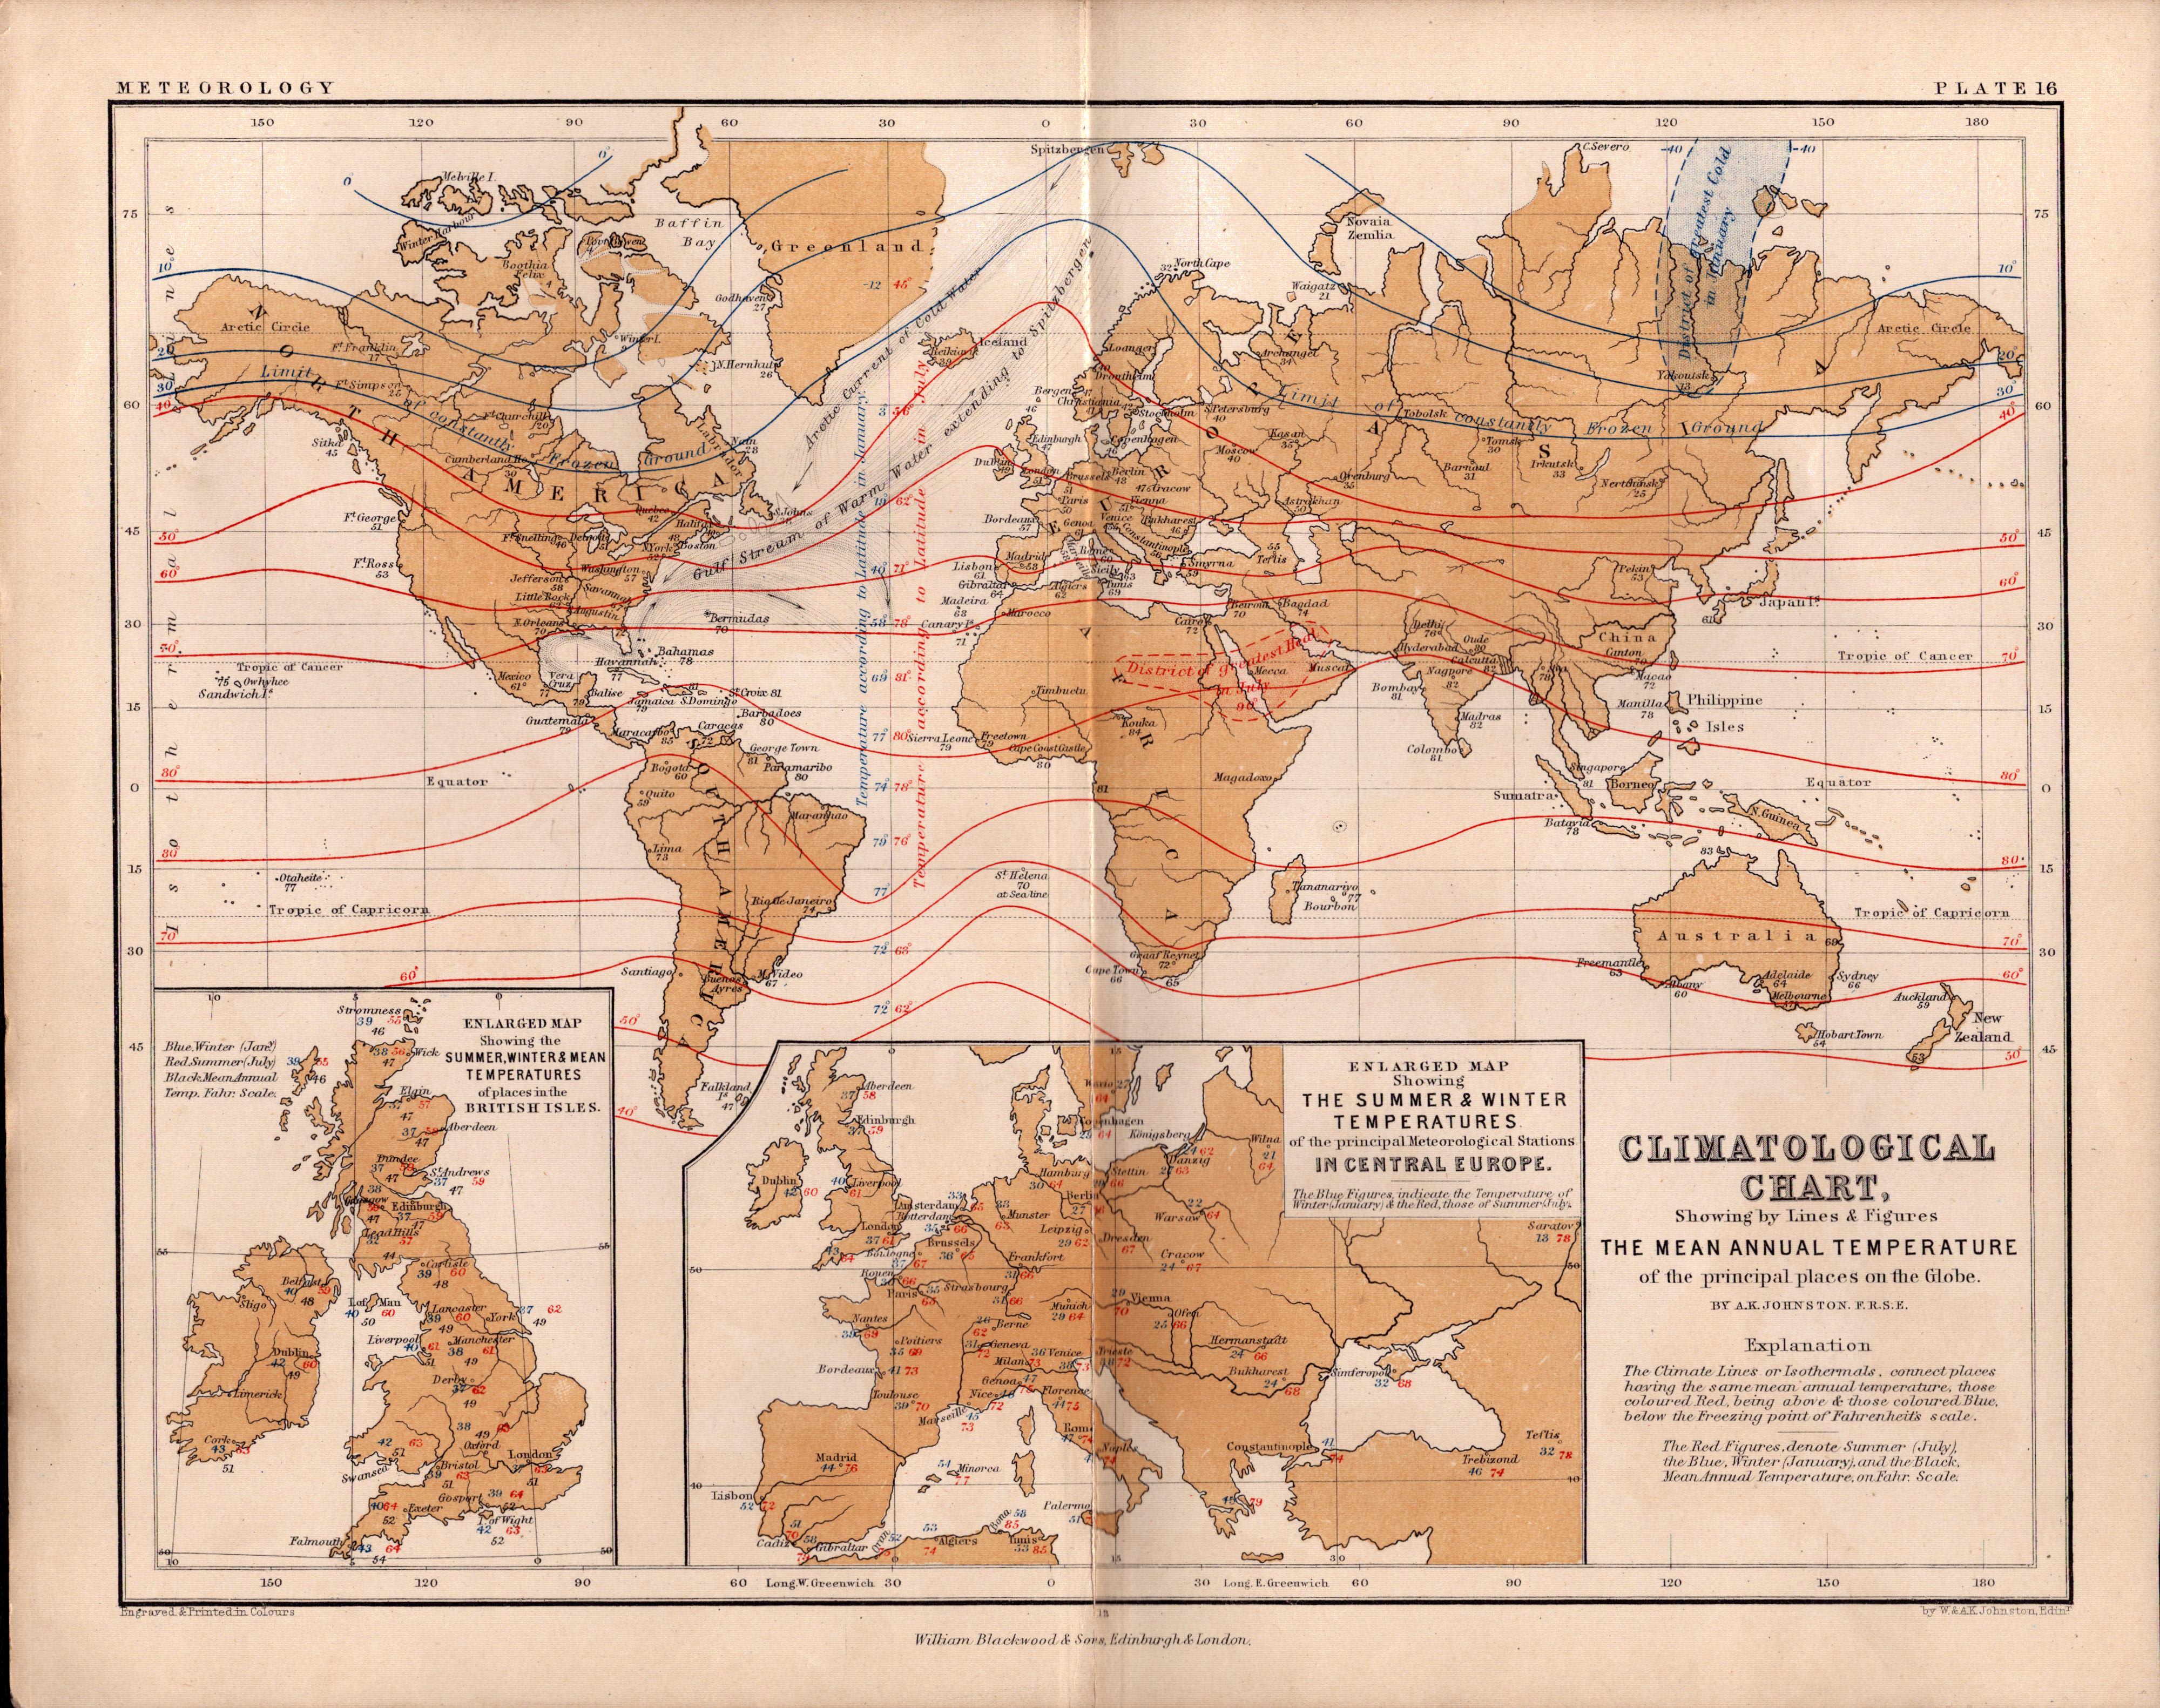 Climatological Chart 1871 WK Johnston Victorian Antique Map.